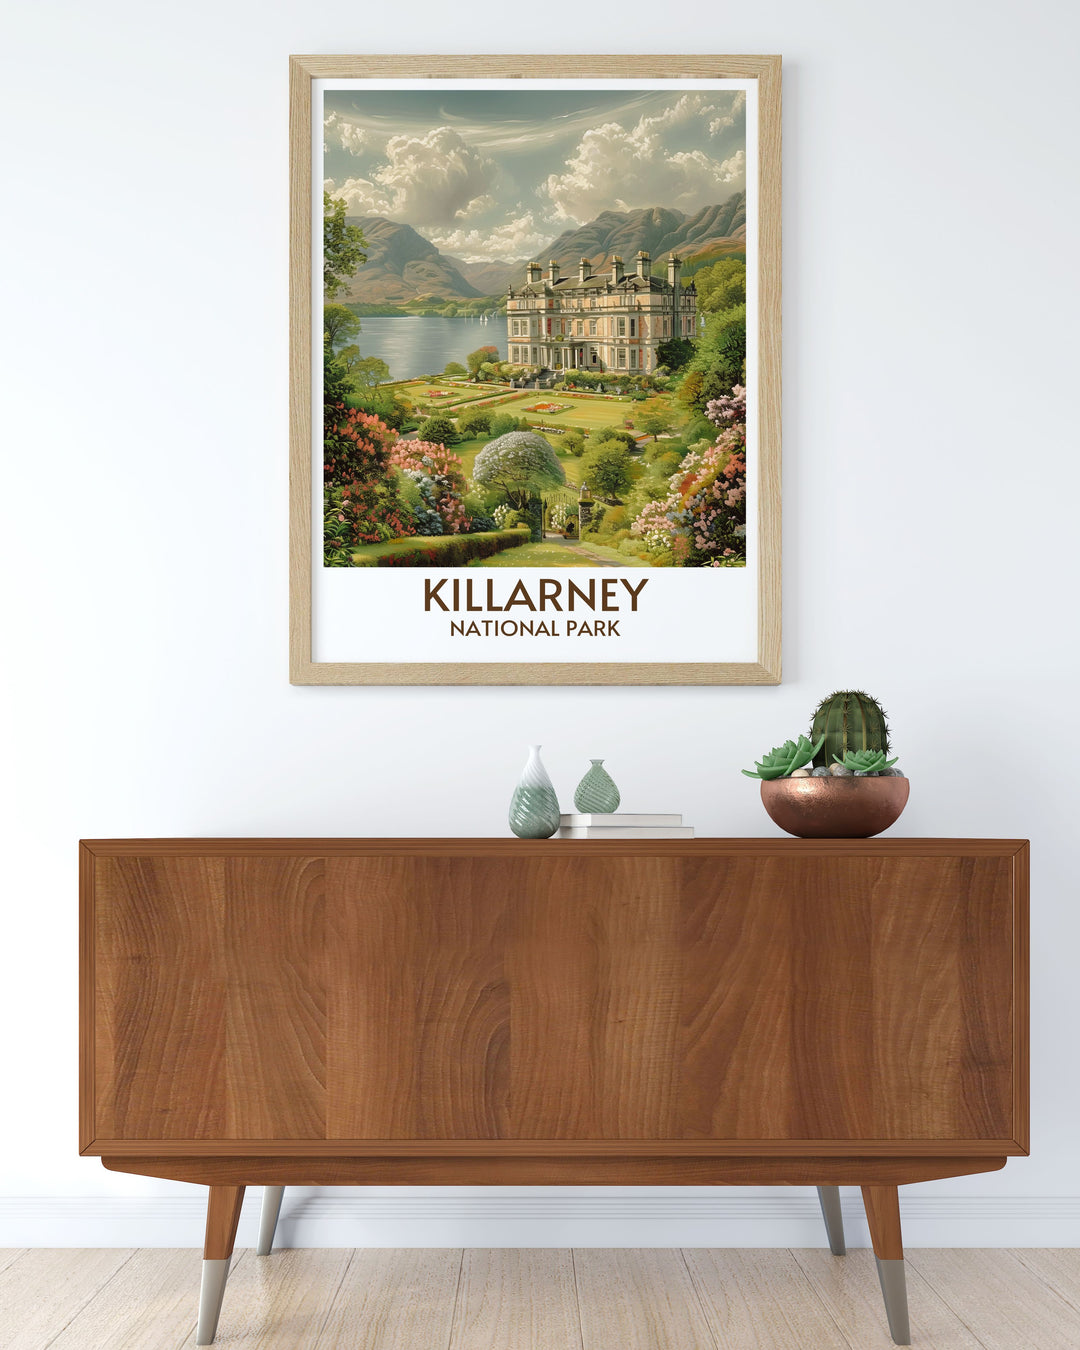 Framed art of the pathways through Killarney National Park, highlighting the tranquility and natural beauty of the Irish countryside.